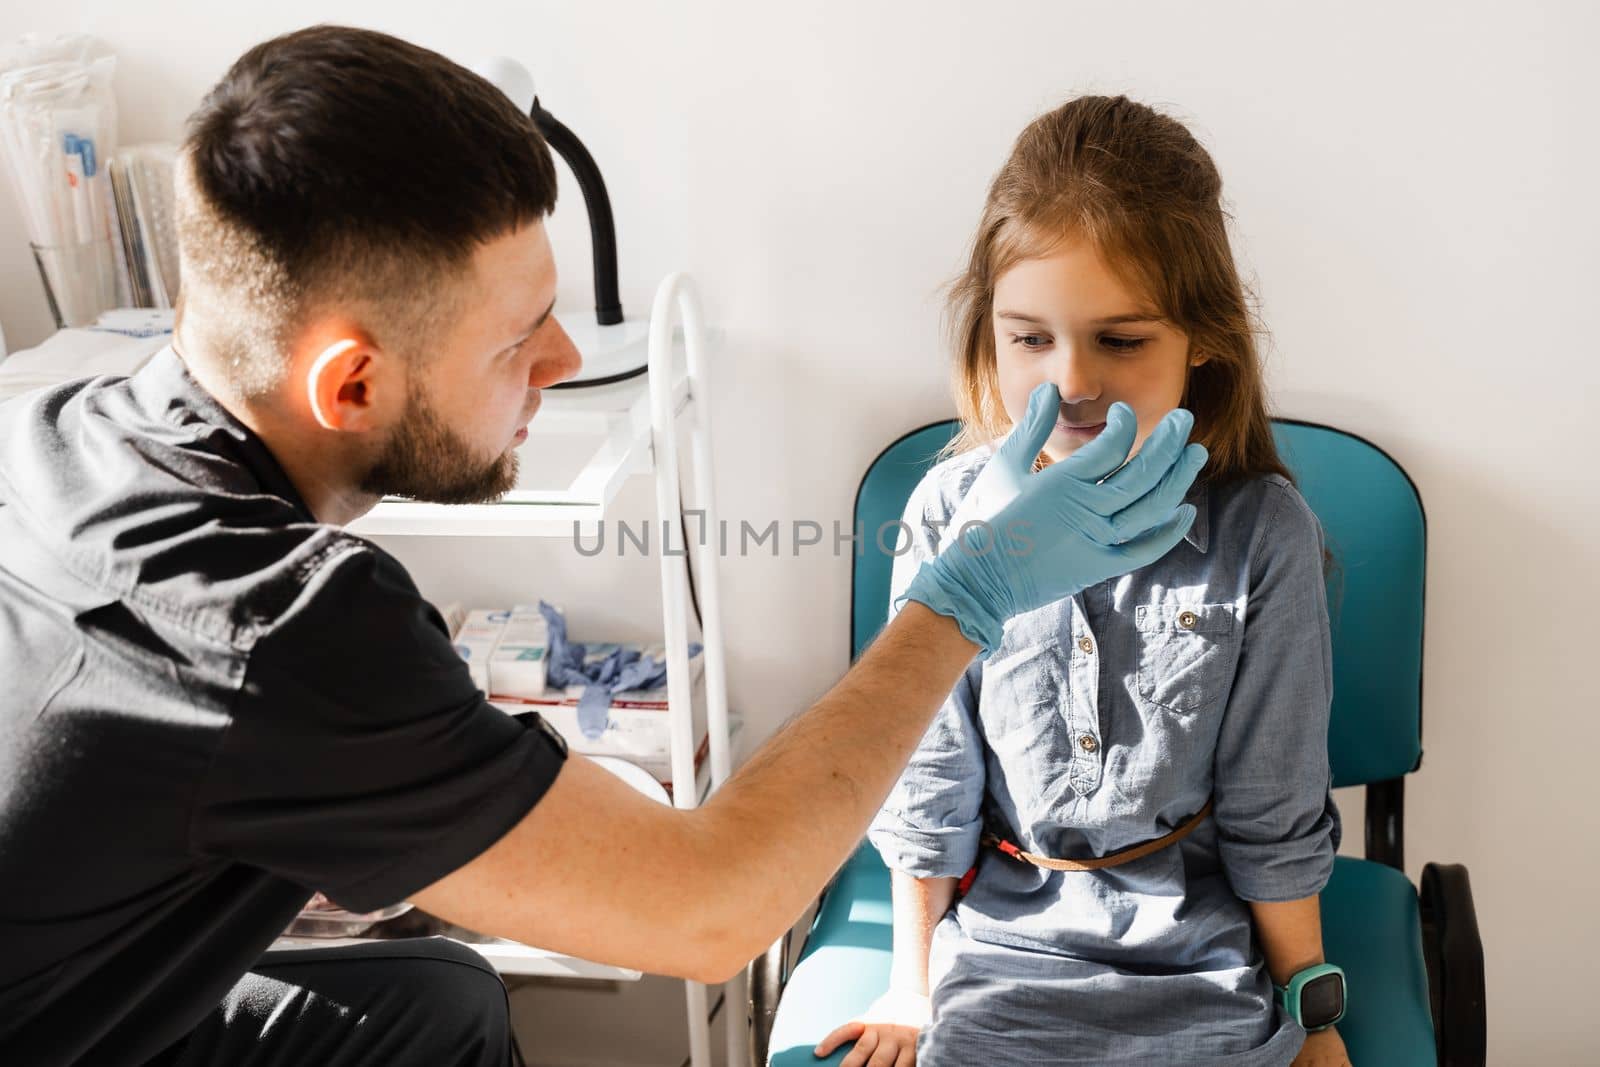 Nose examination of the child. Consultation of kid with a pediatric otolaryngologist in a medical clinic